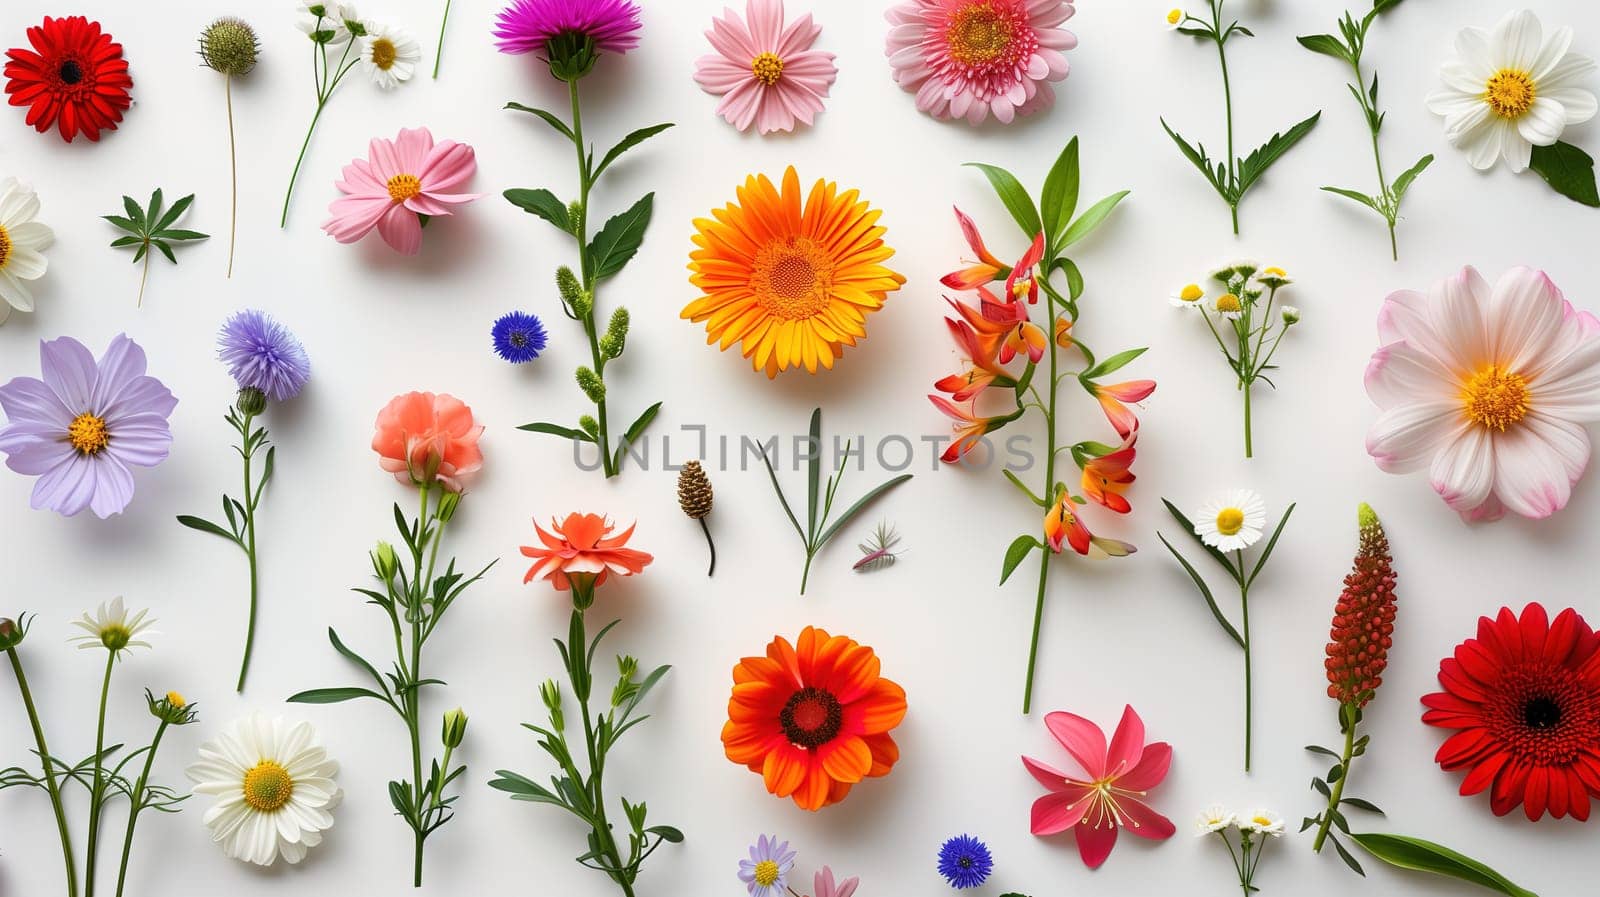 Array of Different Colored Flowers on White Surface by TRMK